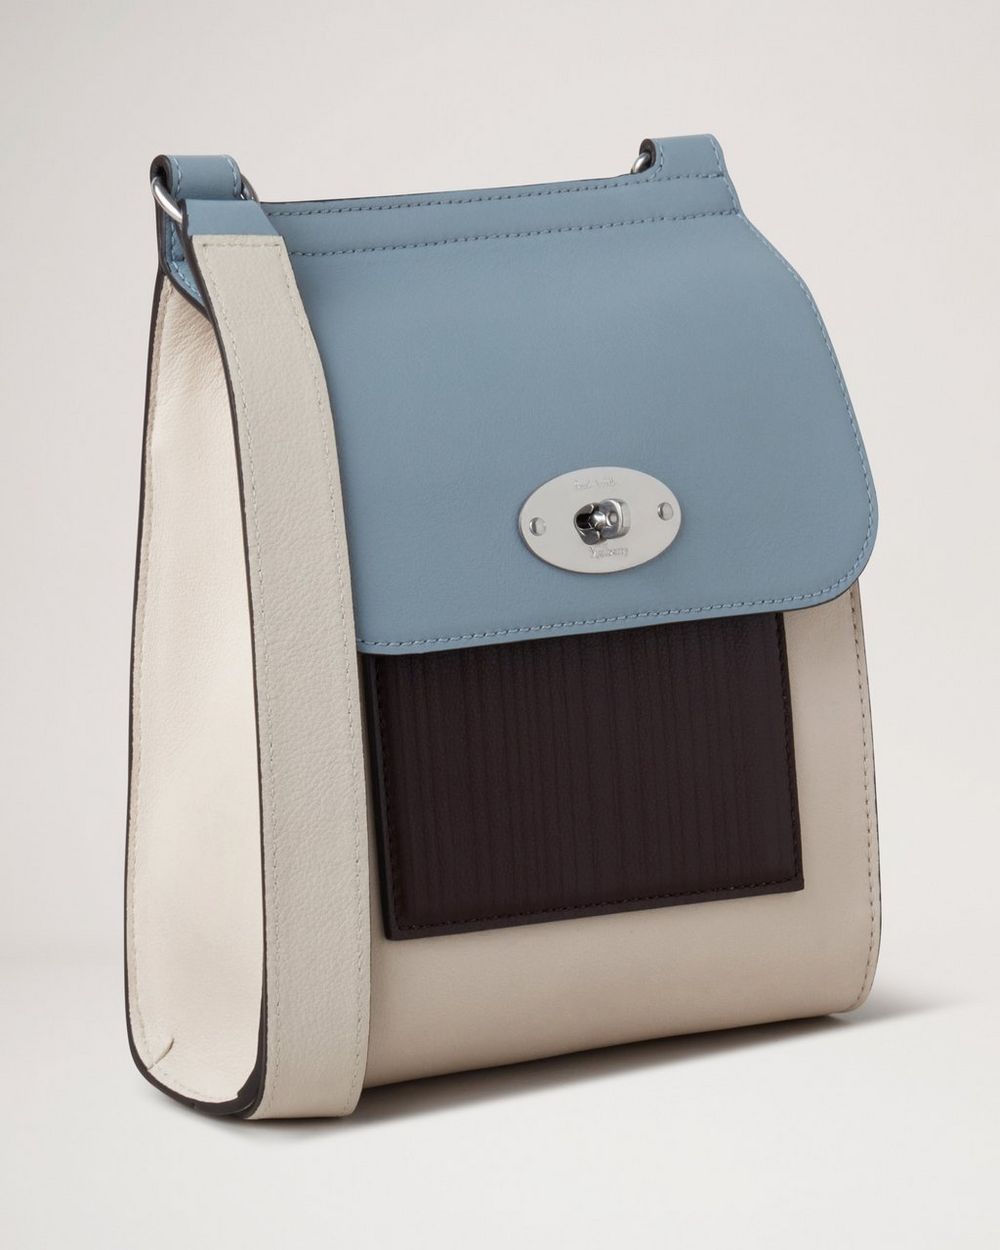 Mulberry & Paul Smith Team Up On New Capsule - Style